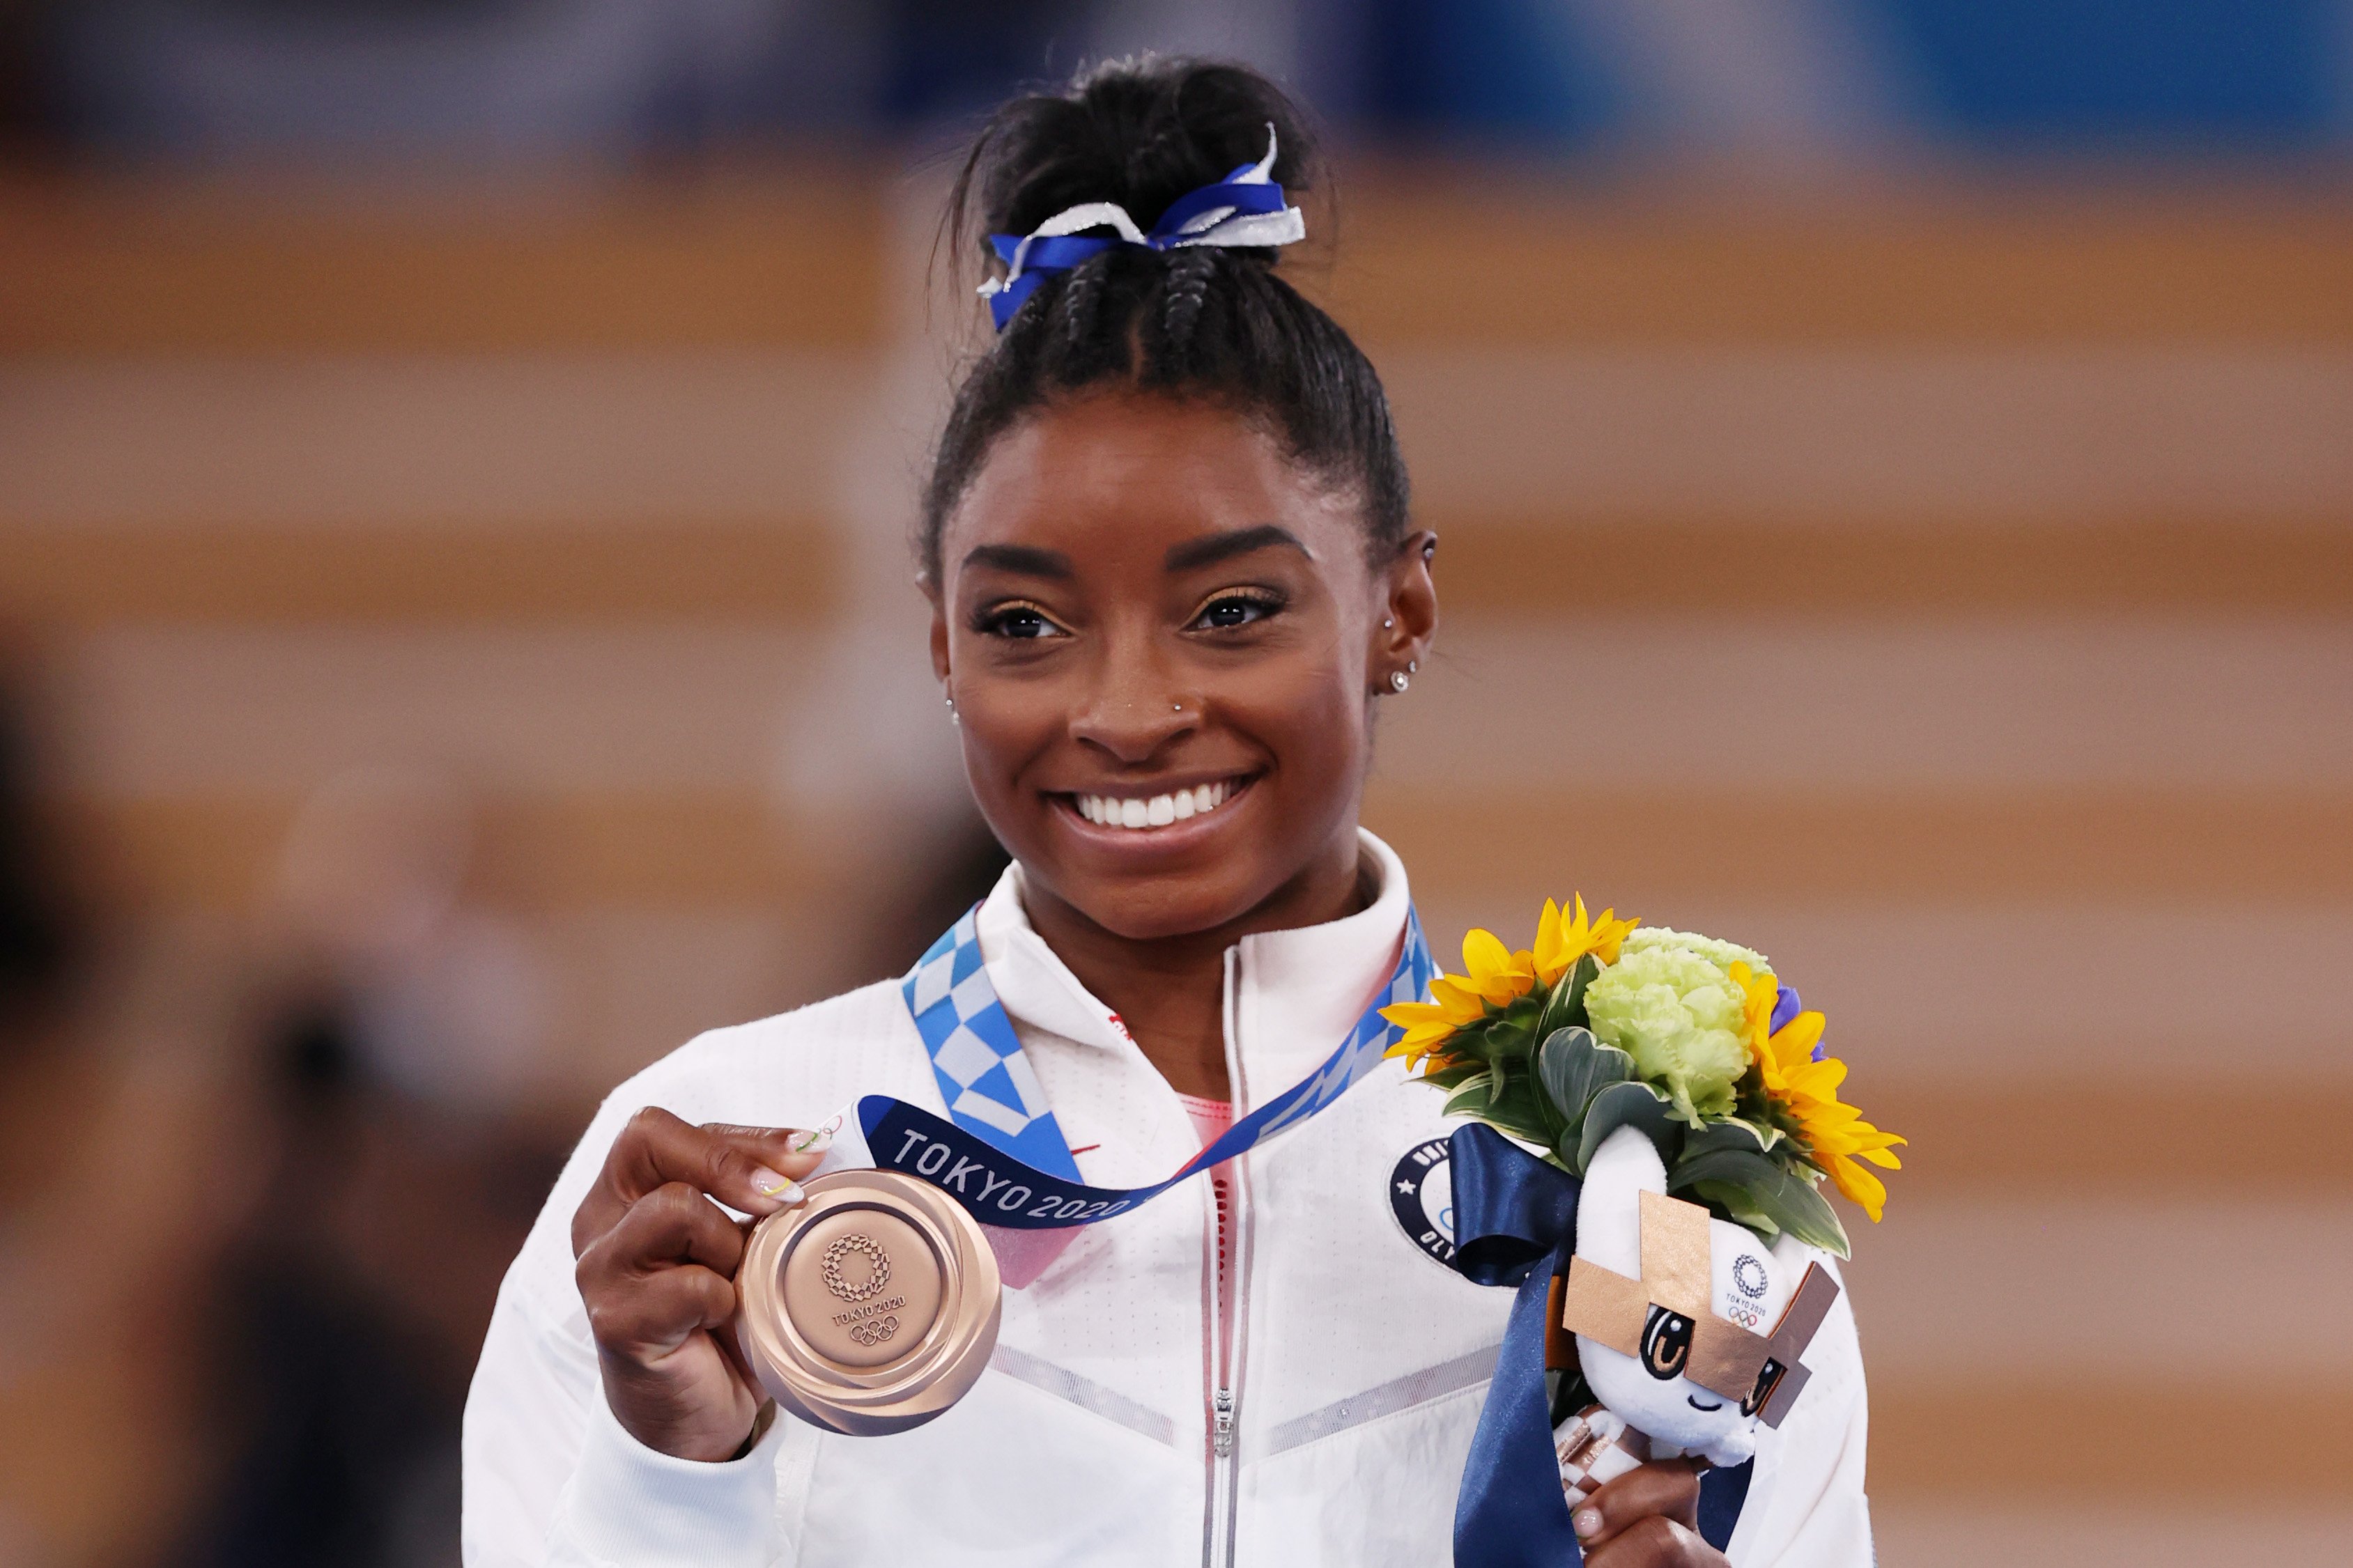 Simone Biles pictured with a bronze medal during the Women's Balance Beam Final medal ceremony in Tokyo 2020 Olympics on August 3, 2021 in Tokyo, Japan. | Photo: Getty Images